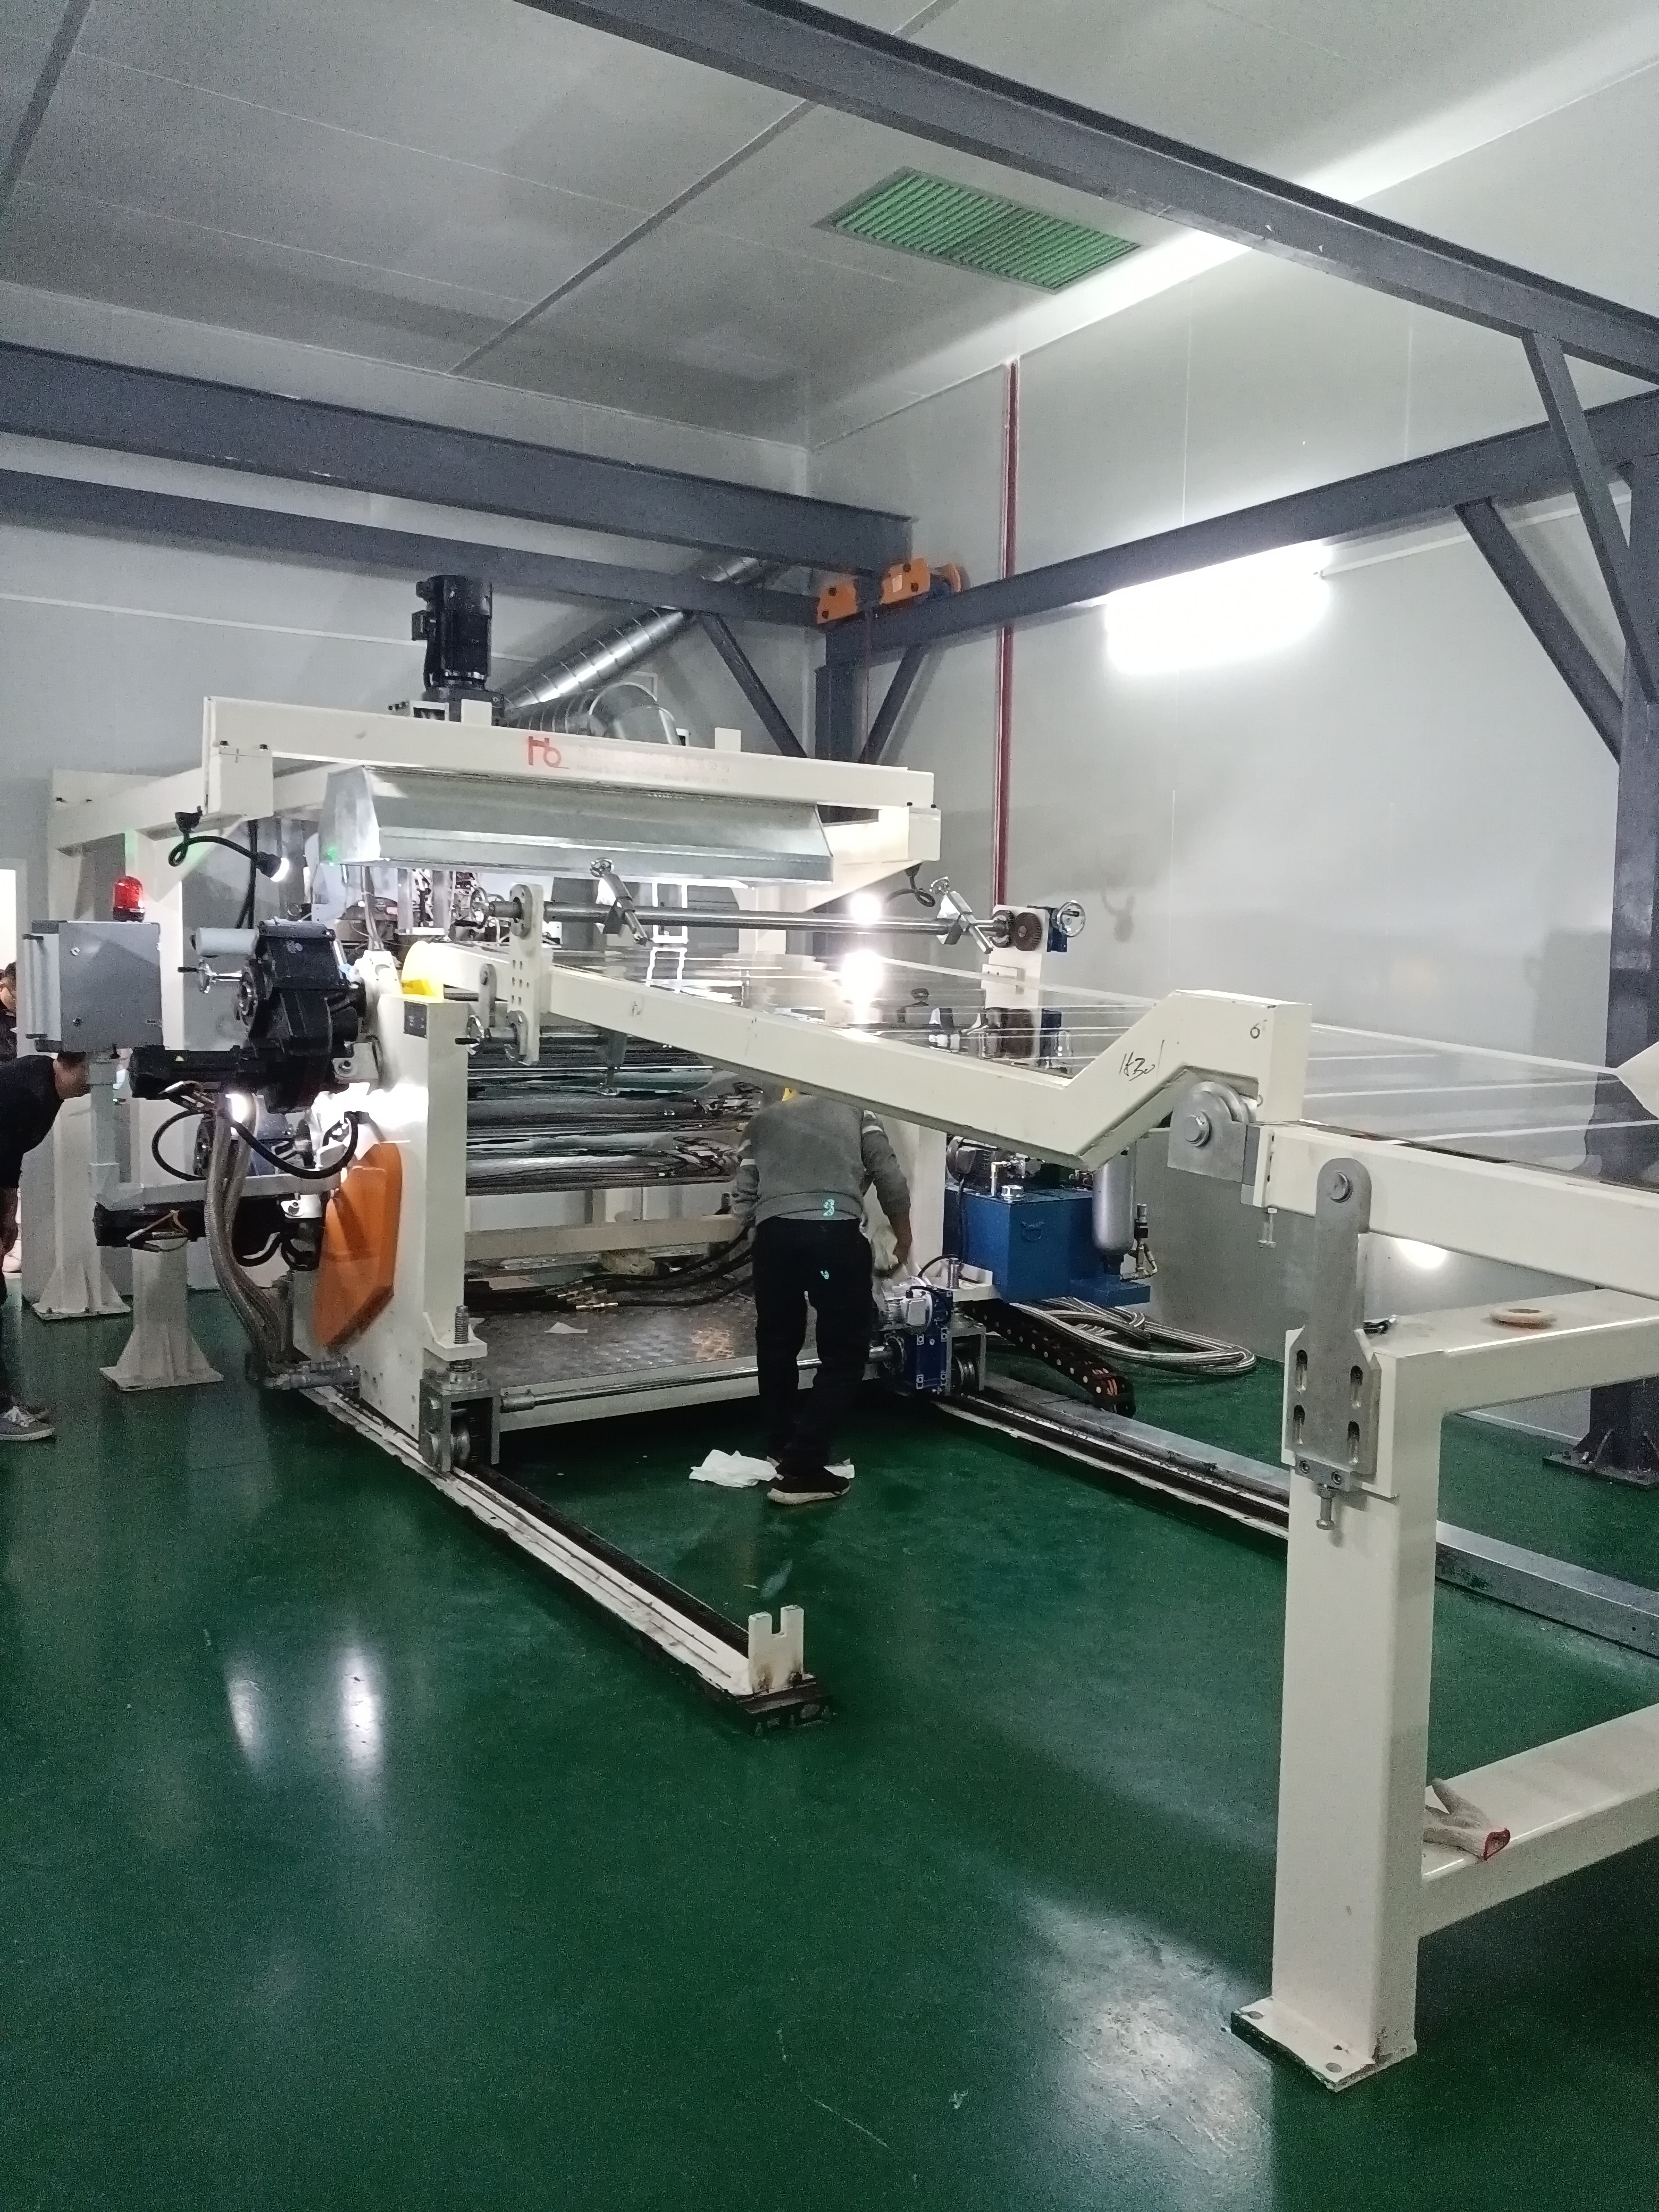 PMMA/PS/PC光學級鏡面片（板）材擠出生產線（PMMA/PS/PC optic mirror sheet and plate extrusion line)